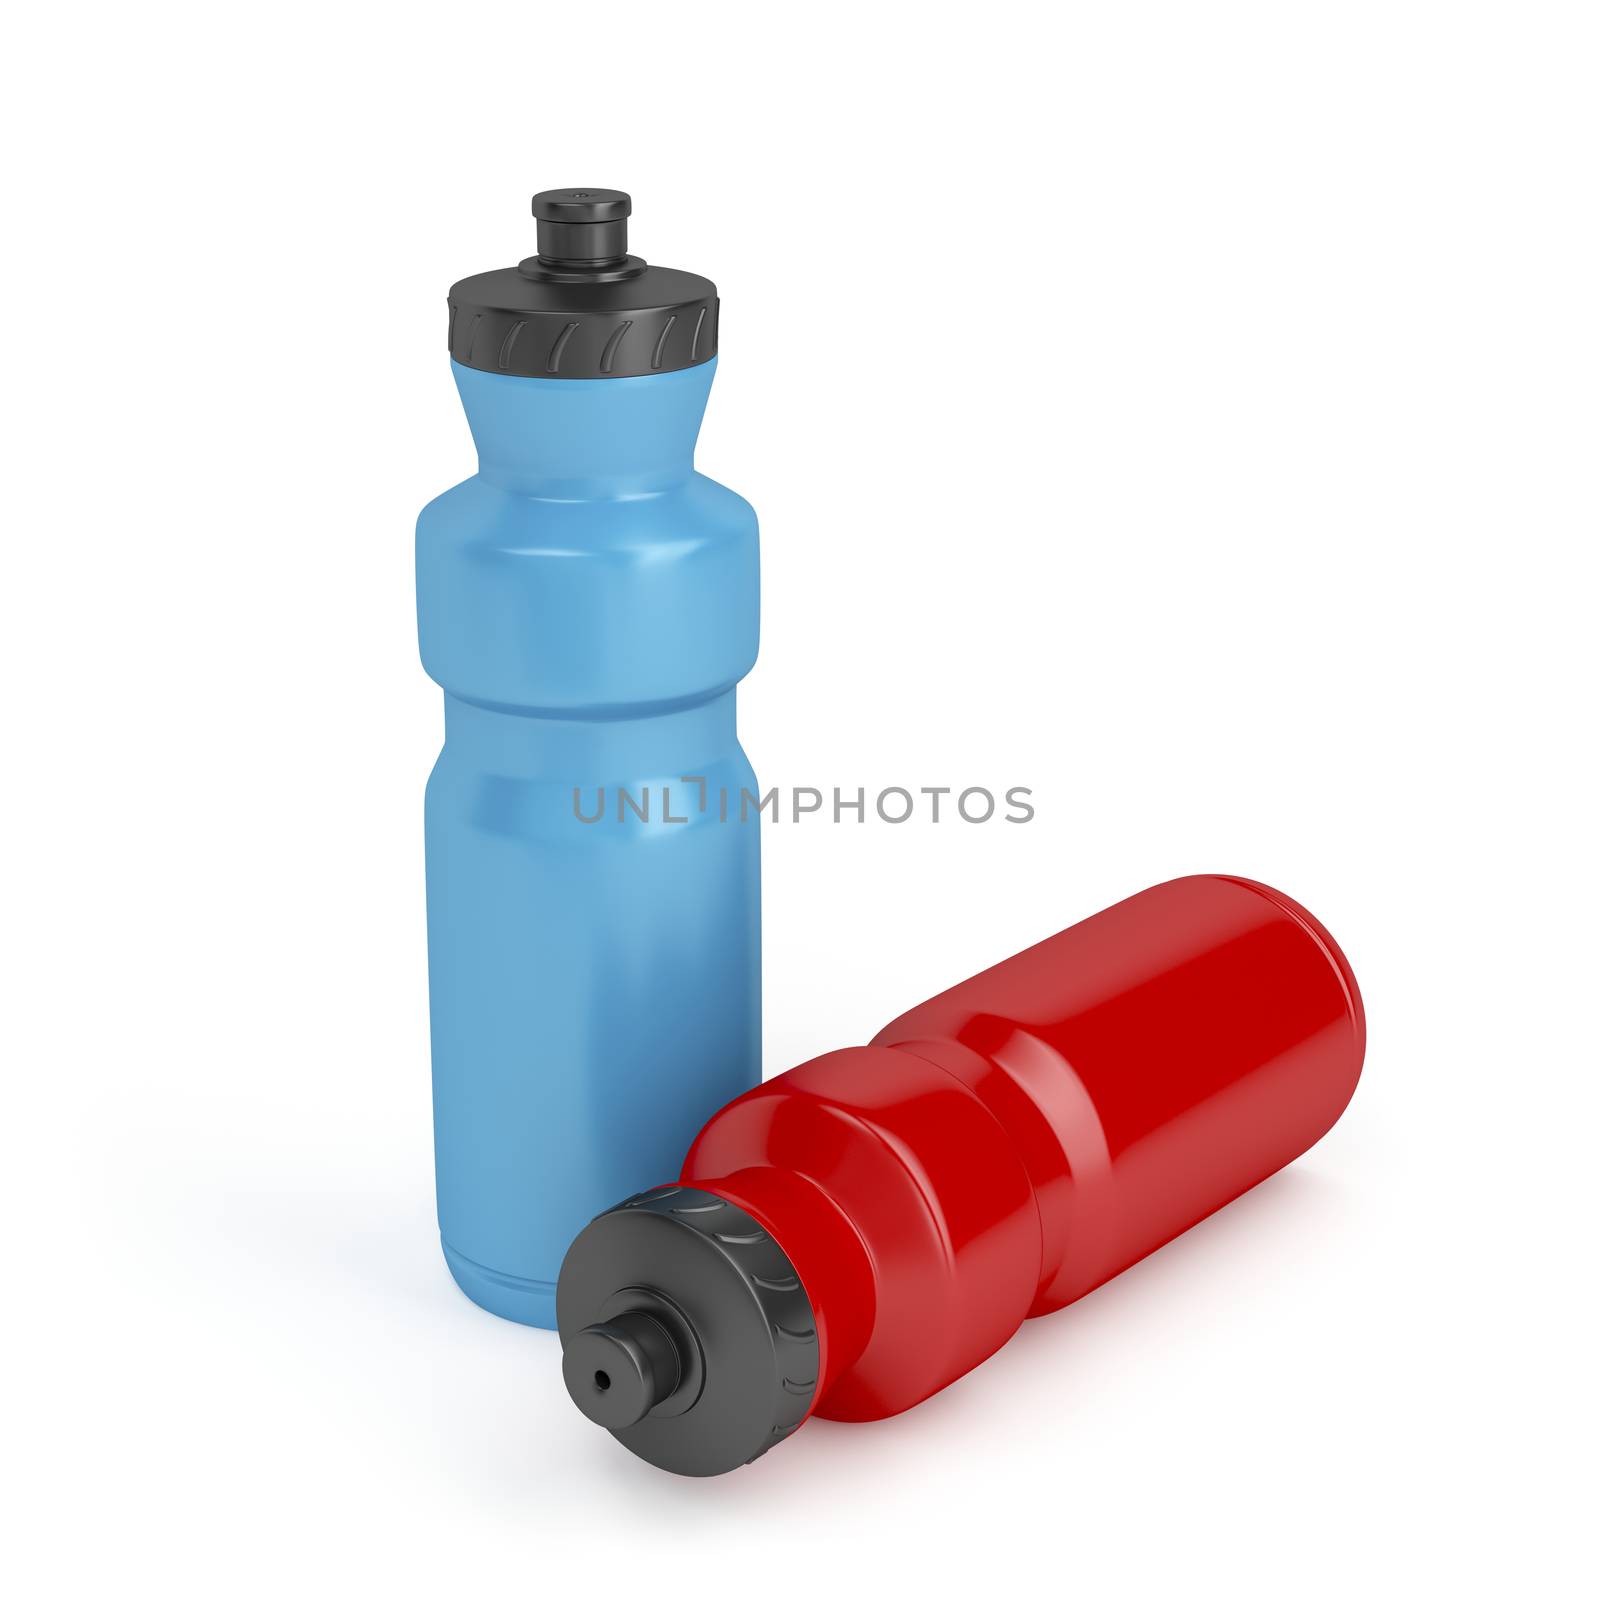 Blue and red plastic bottles by magraphics